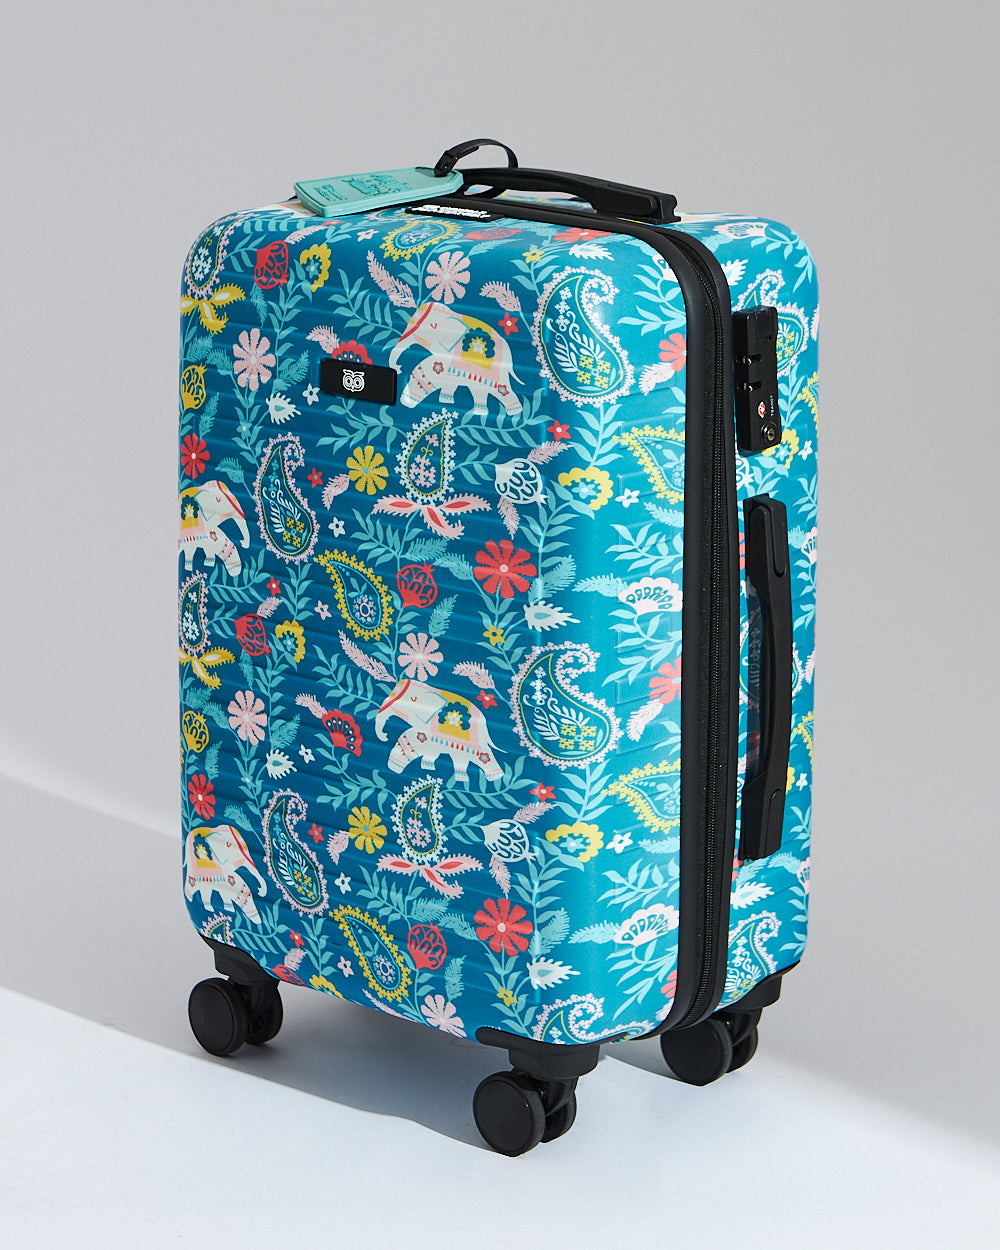 Paisley Tusker Luggage, Set of 2 | Cabin + Check-in